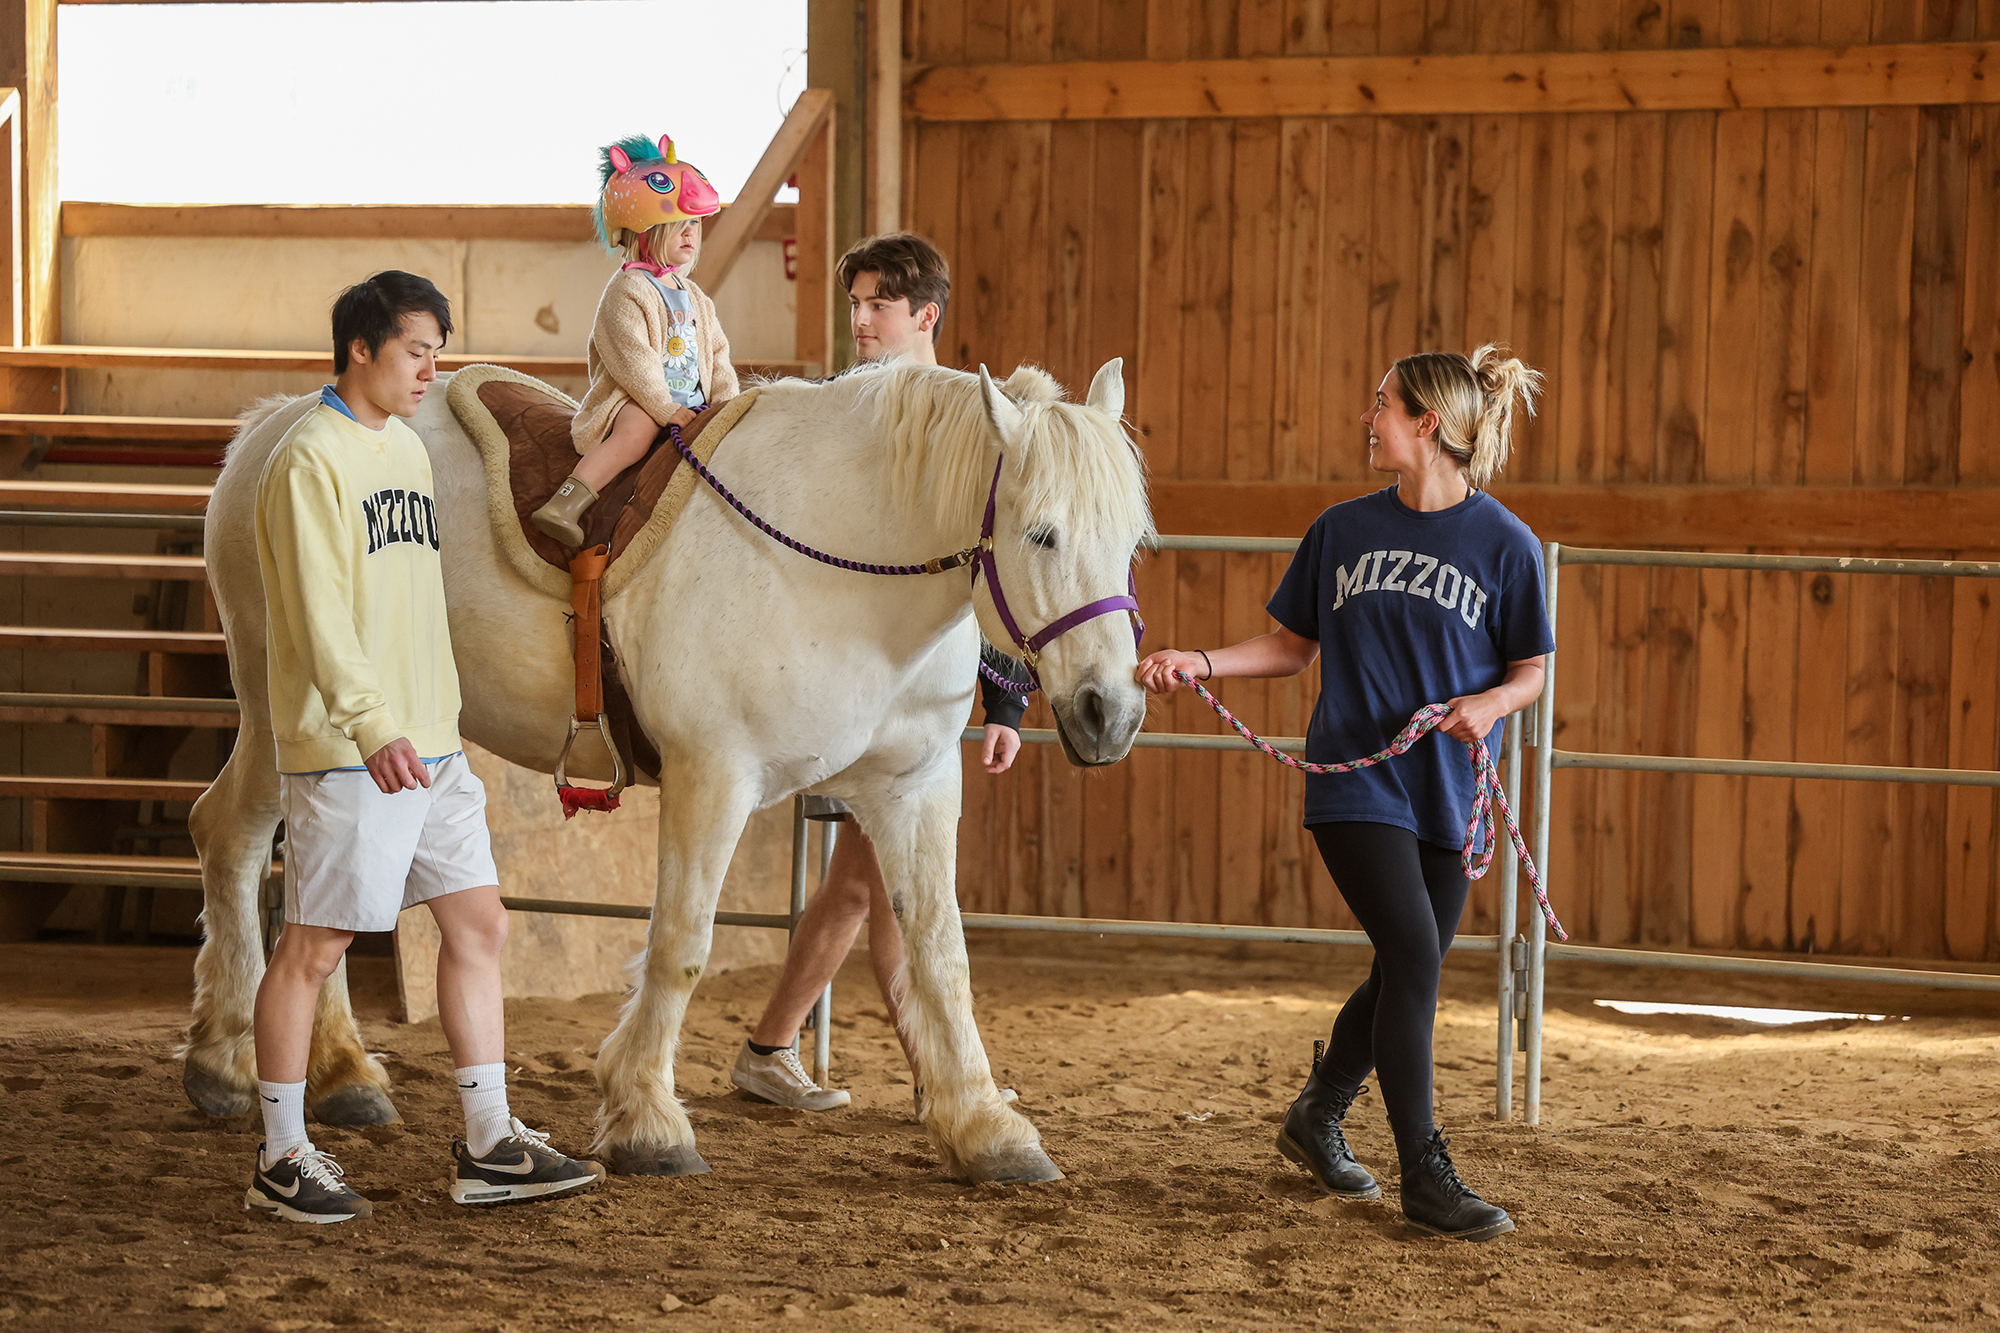 Small girl rides white horse while students wearing Mizzou shirts assist